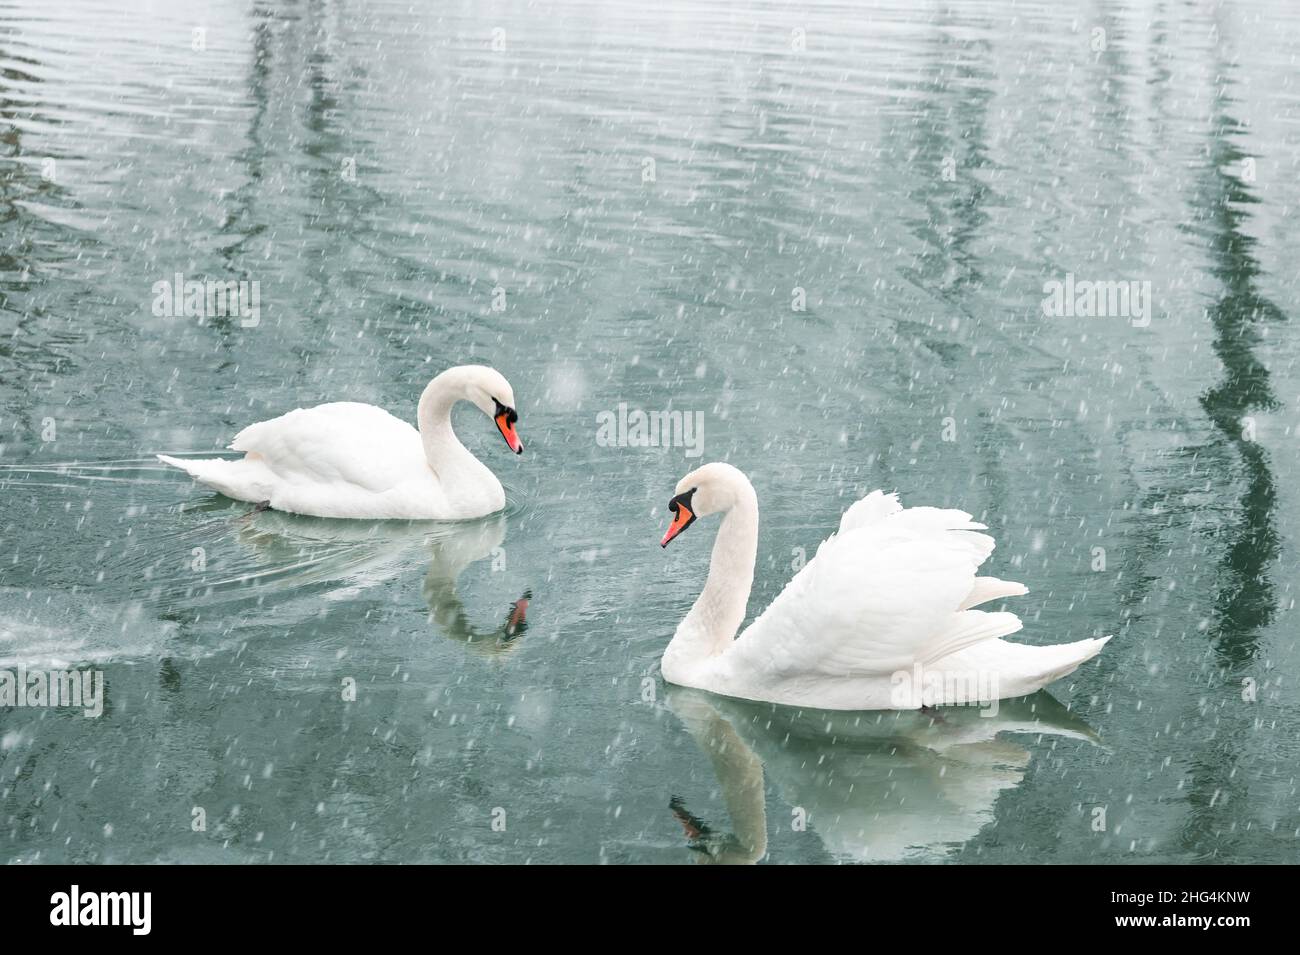 Couple of white swans swim in the winter lake water. Snow falling. Animal photography Stock Photo